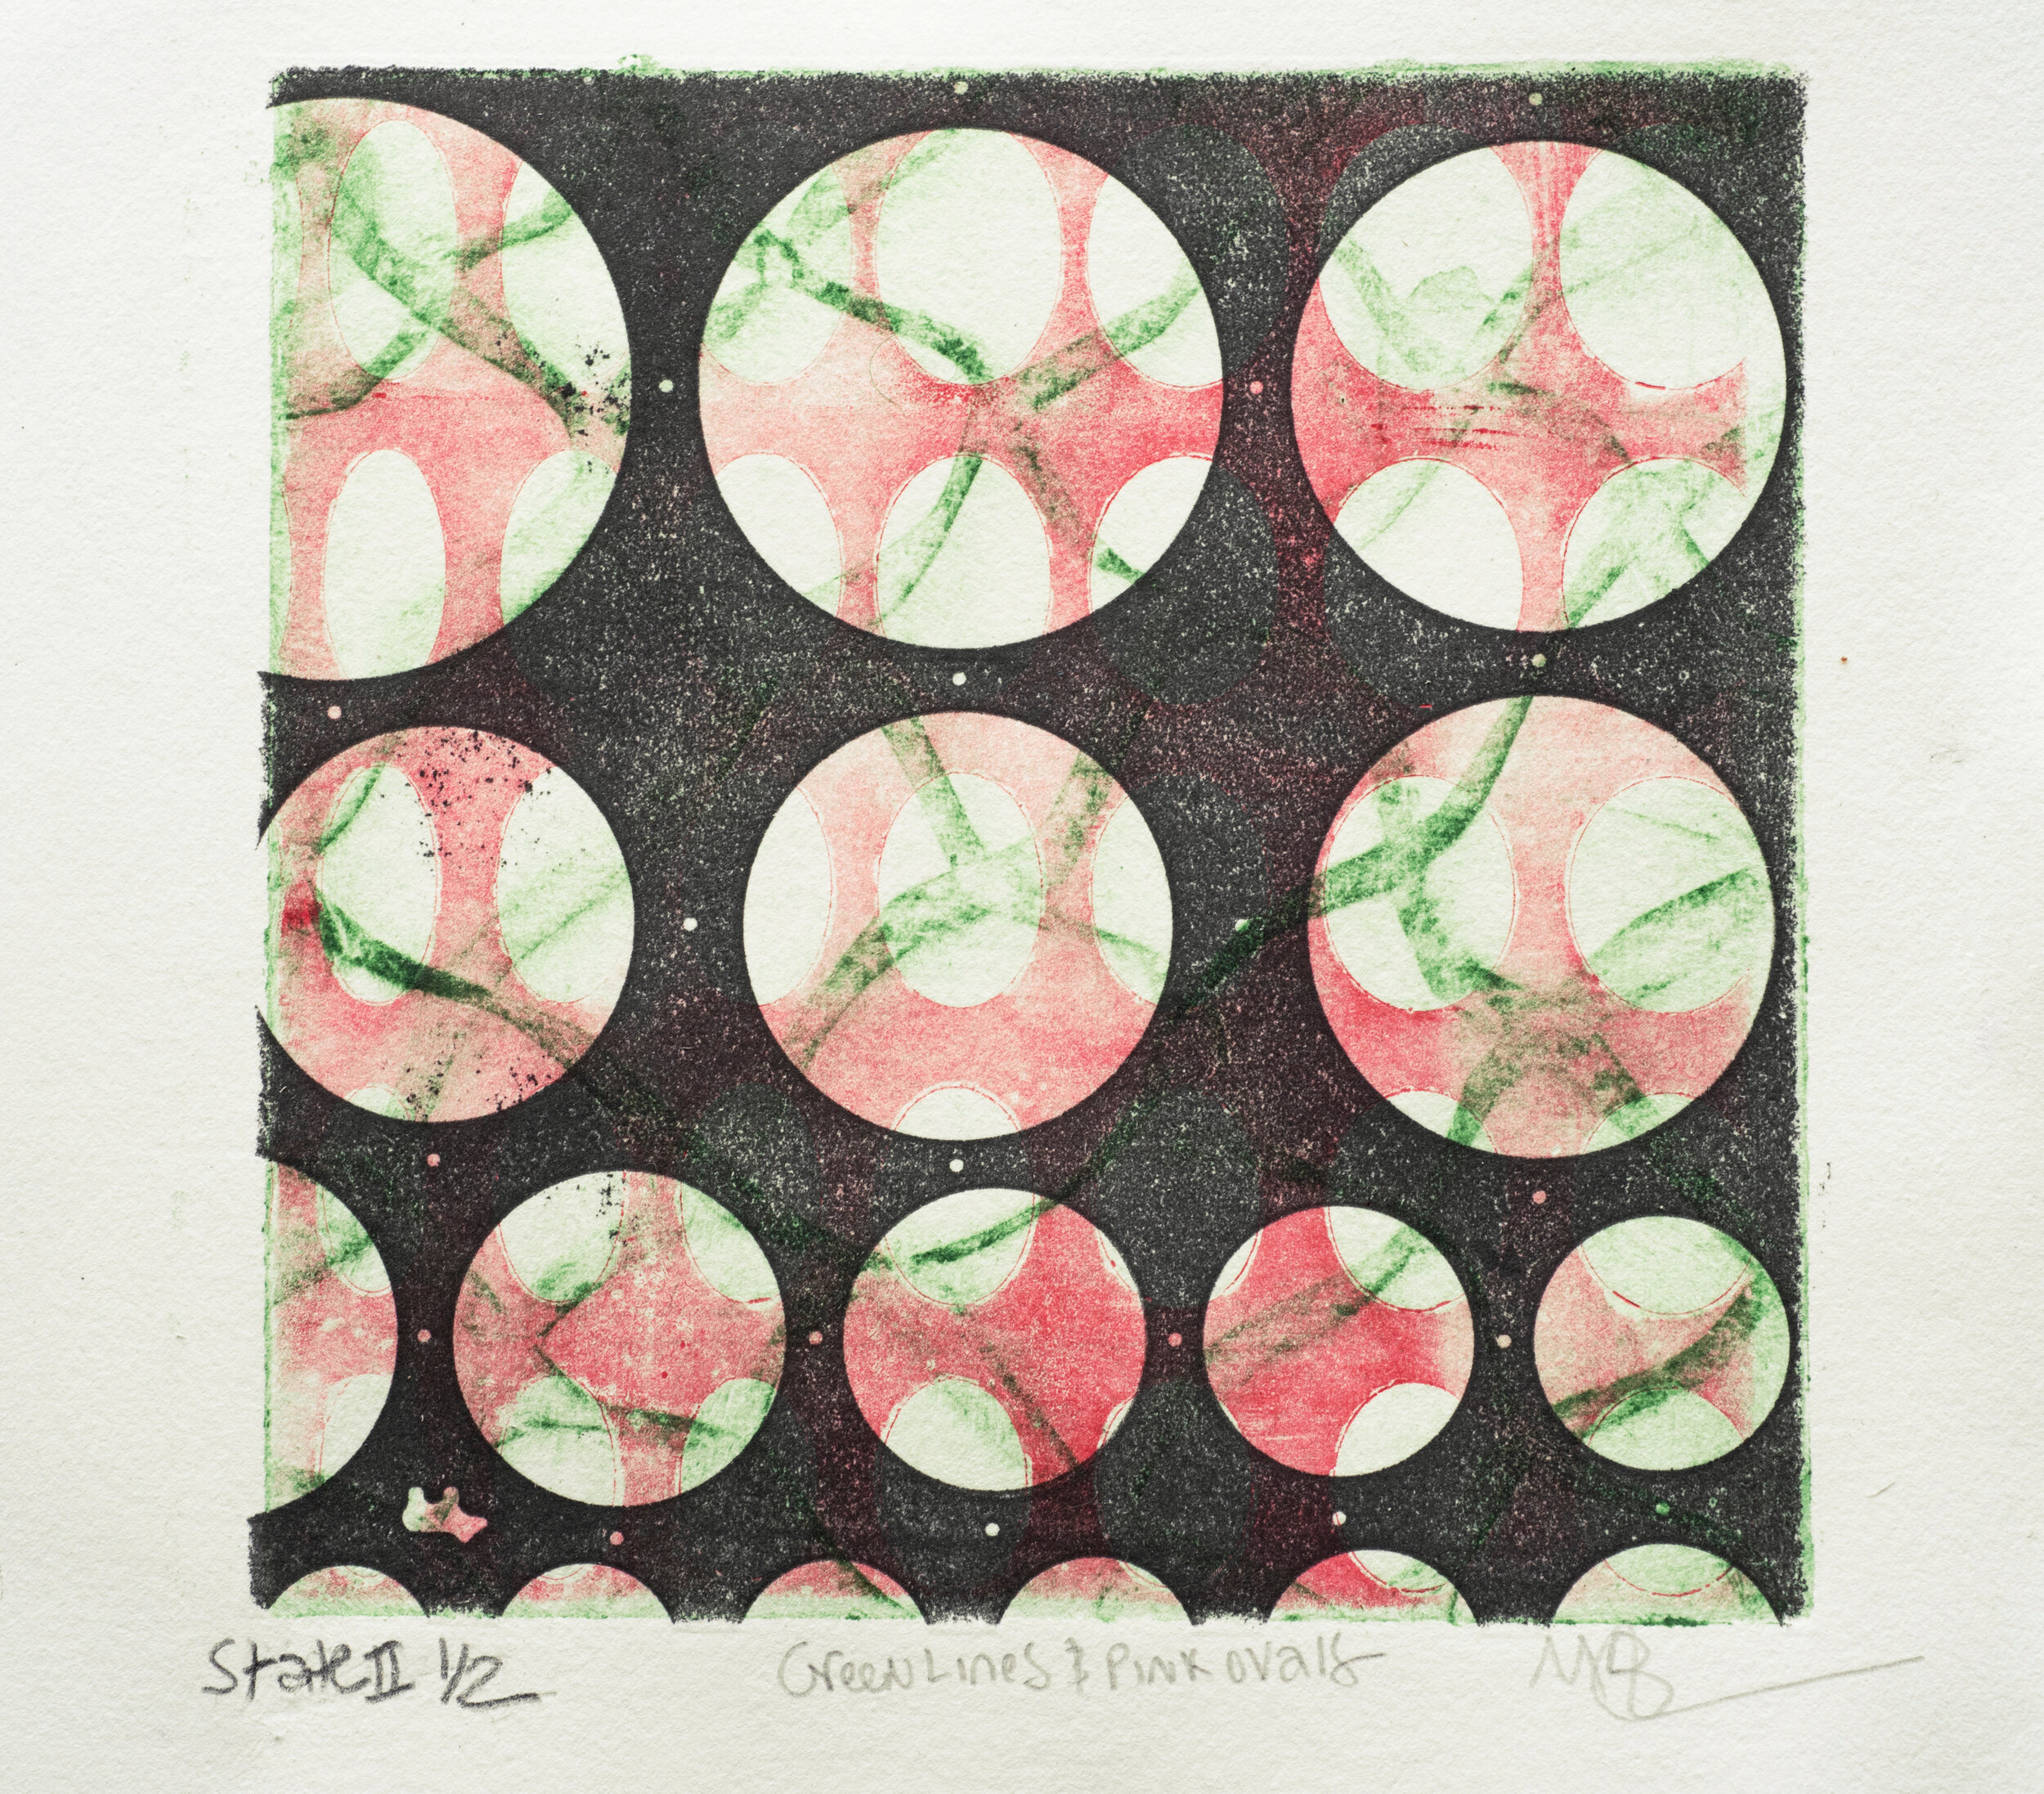 Green Lines and Pink Ovals State II